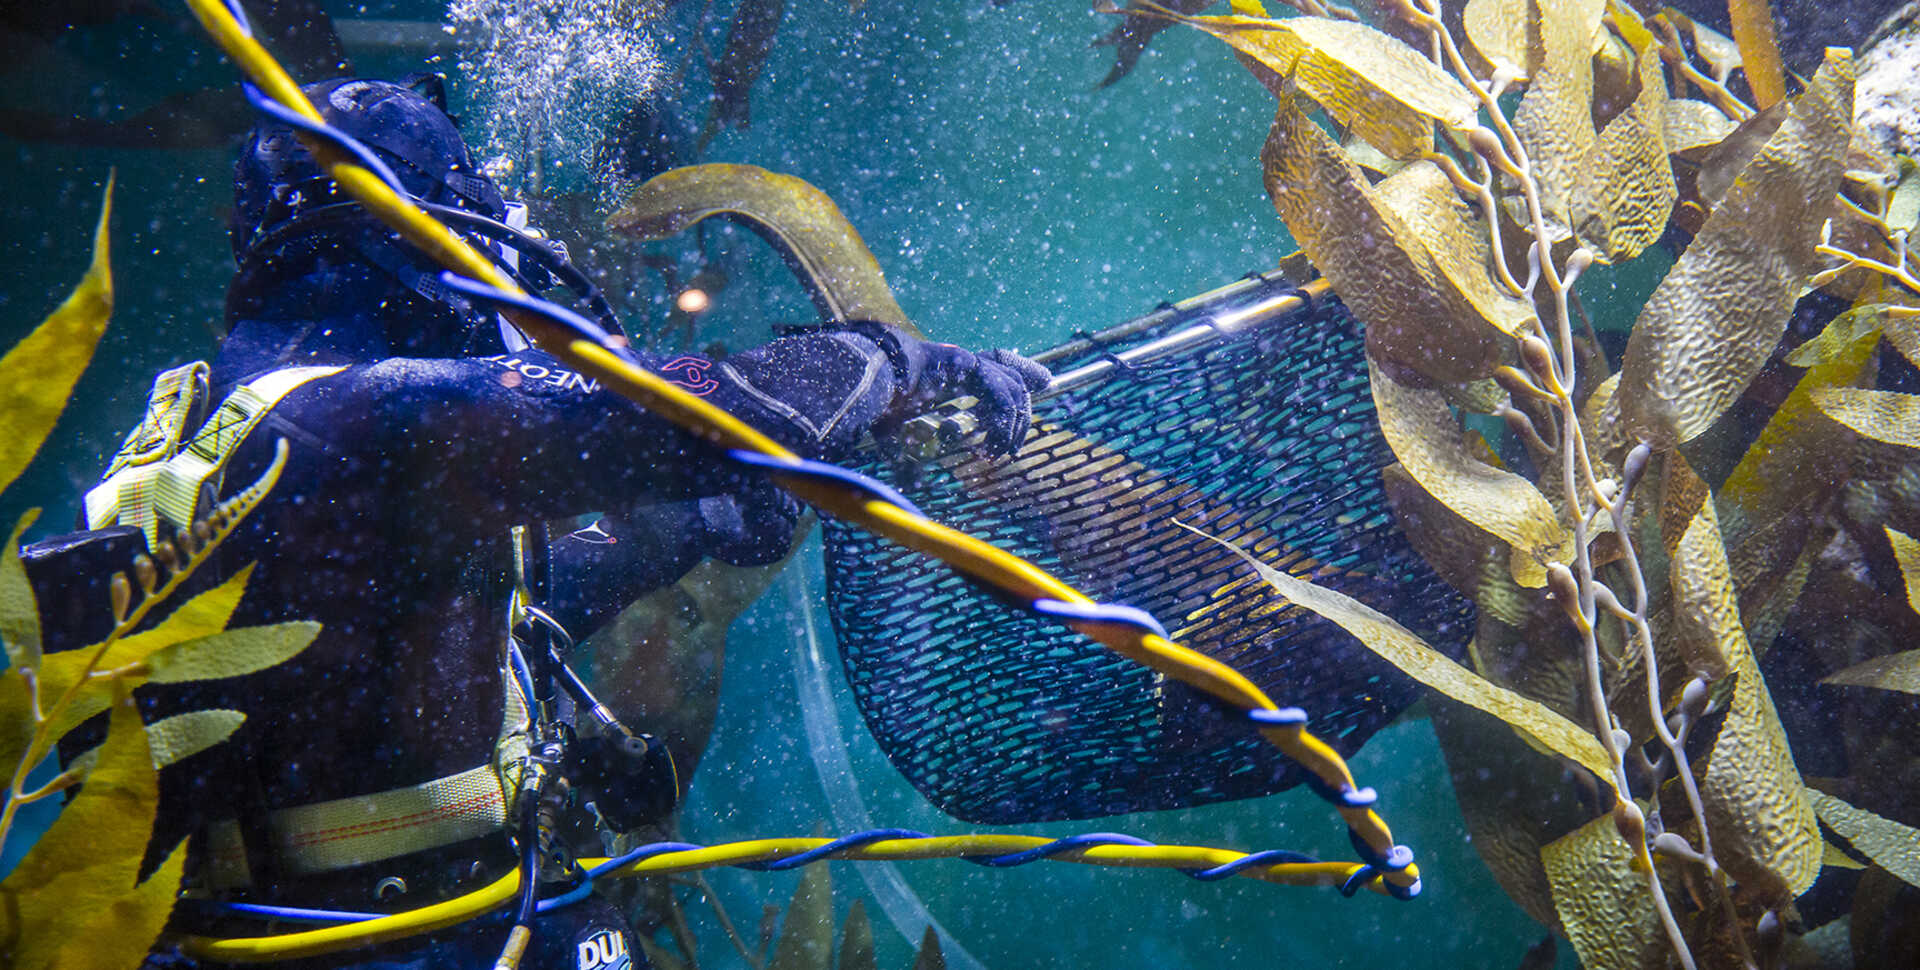 An Academy diver places a moray eel in a net for its veterinary exam